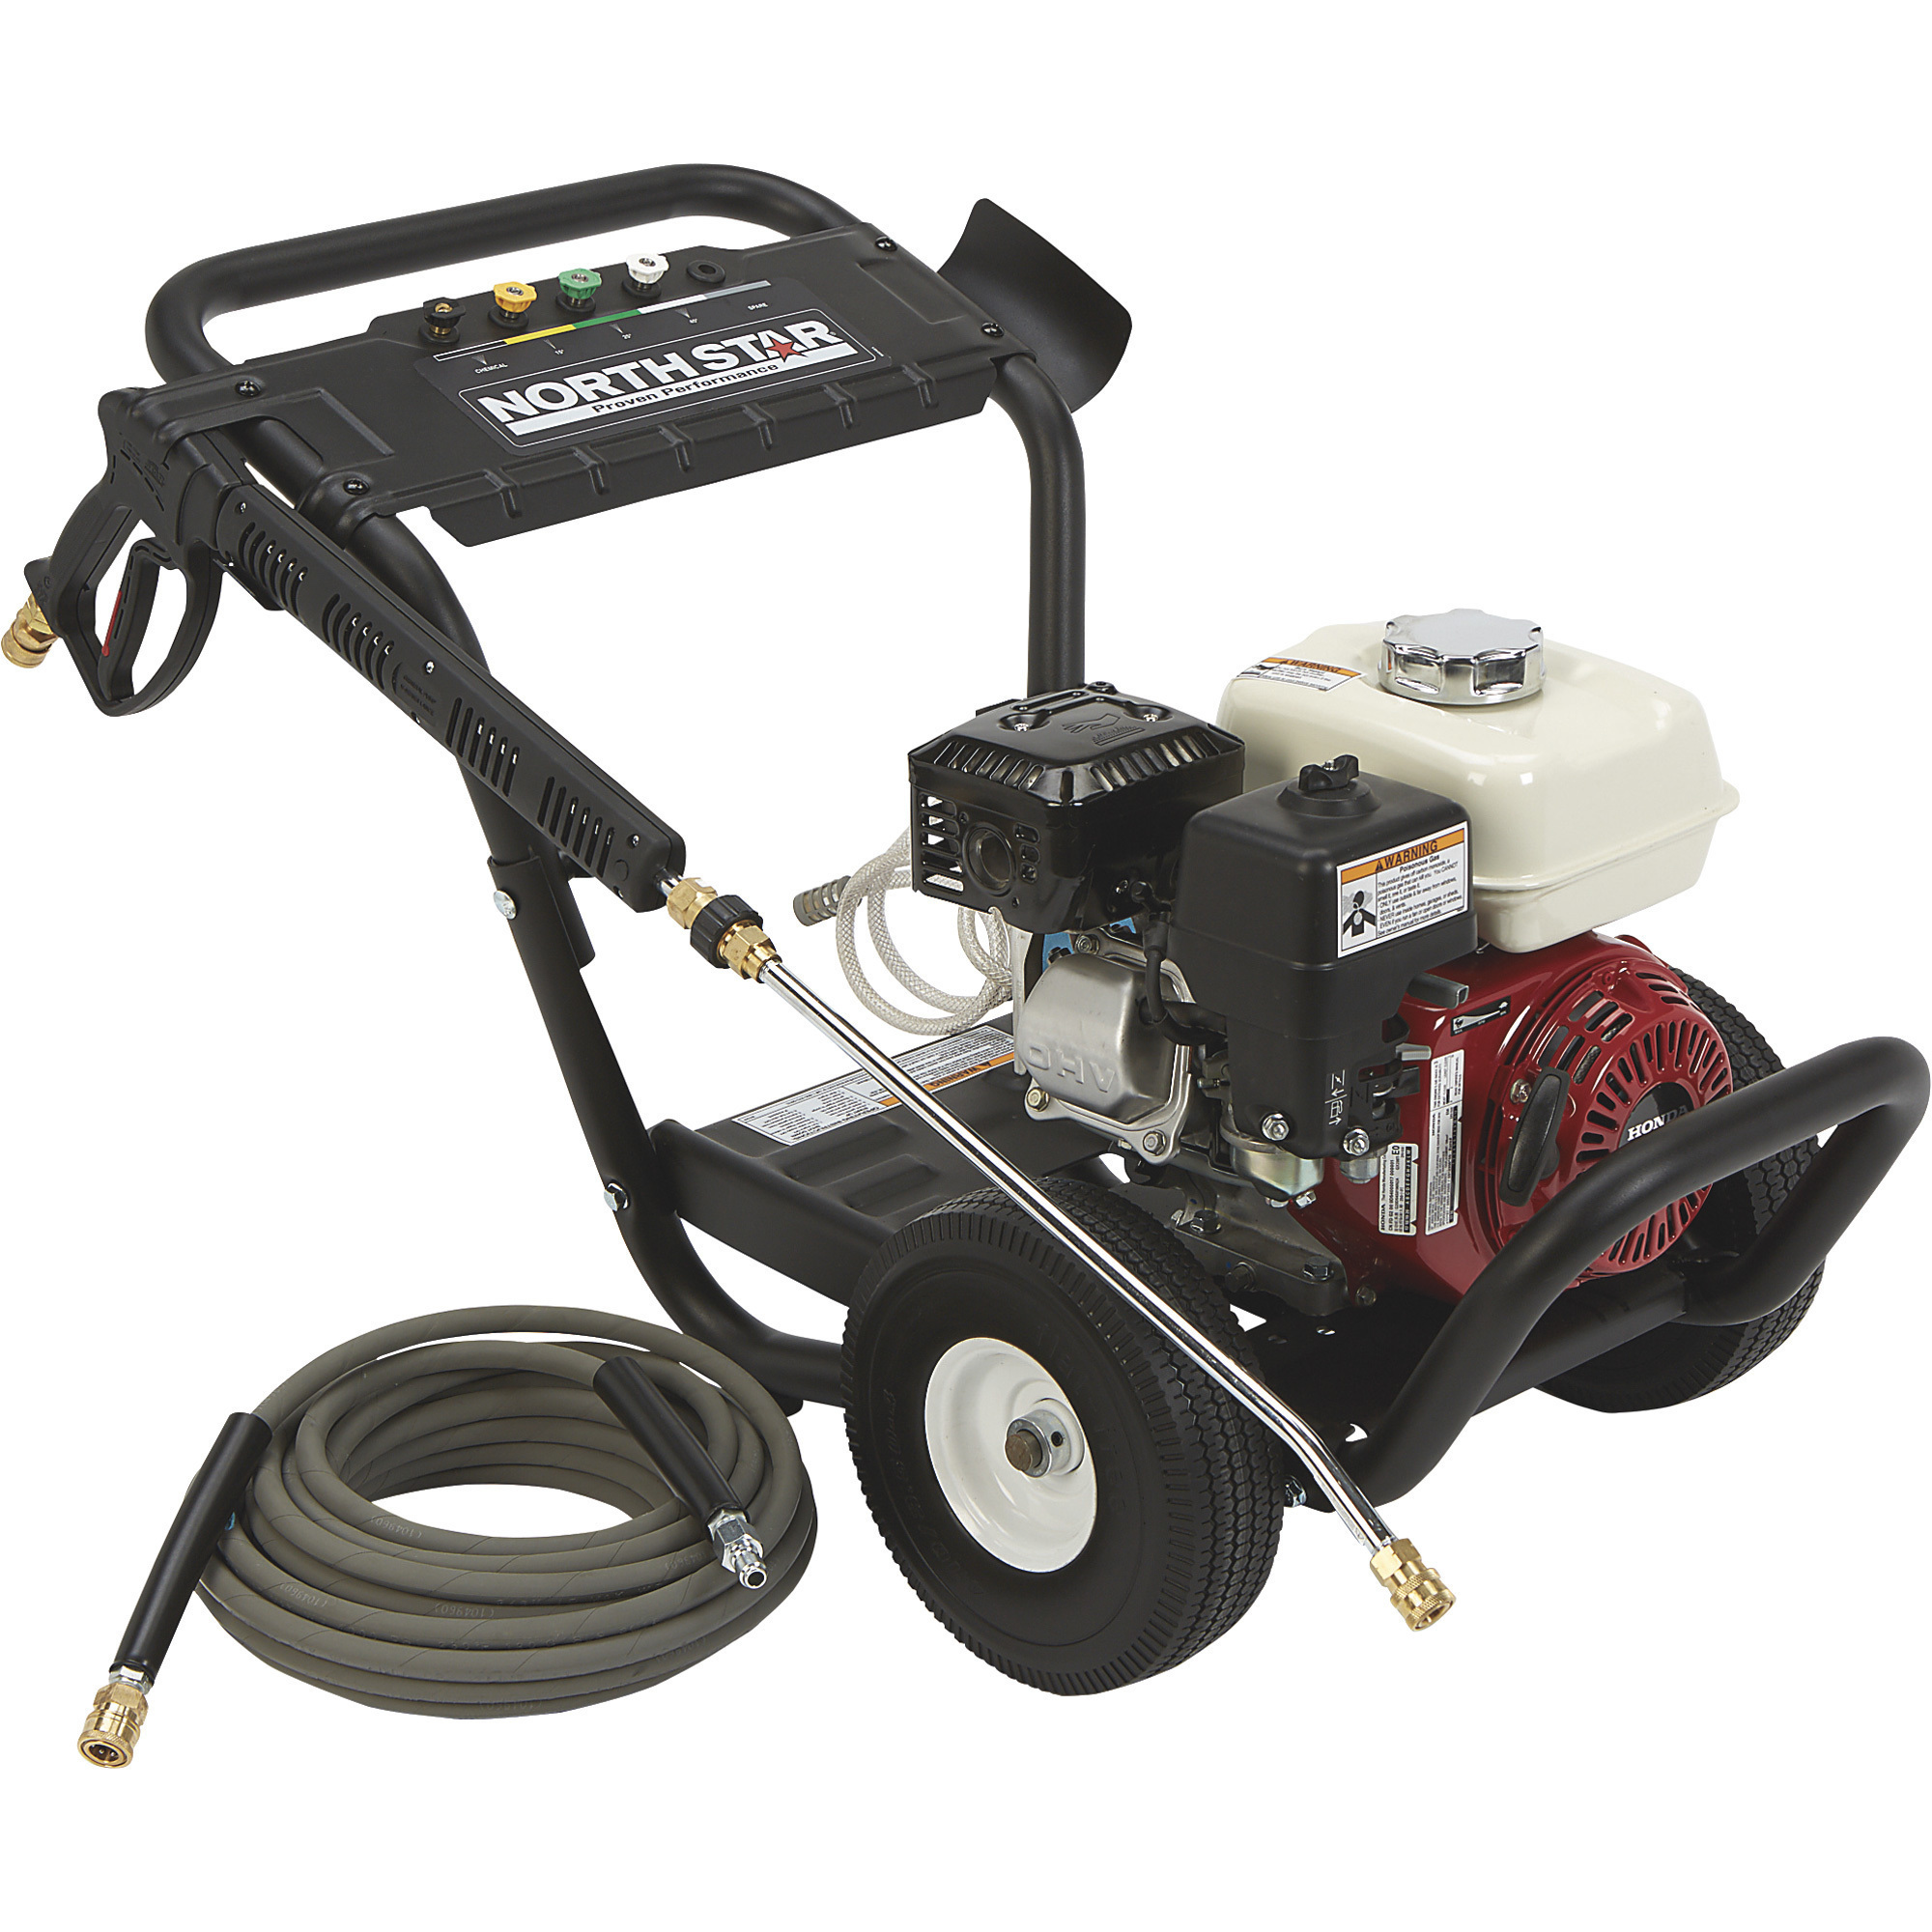 NorthStar Gas Cold Water Pressure Washer, 3,300 PSI, 2.5 GPM Honda Engine, Model 157123